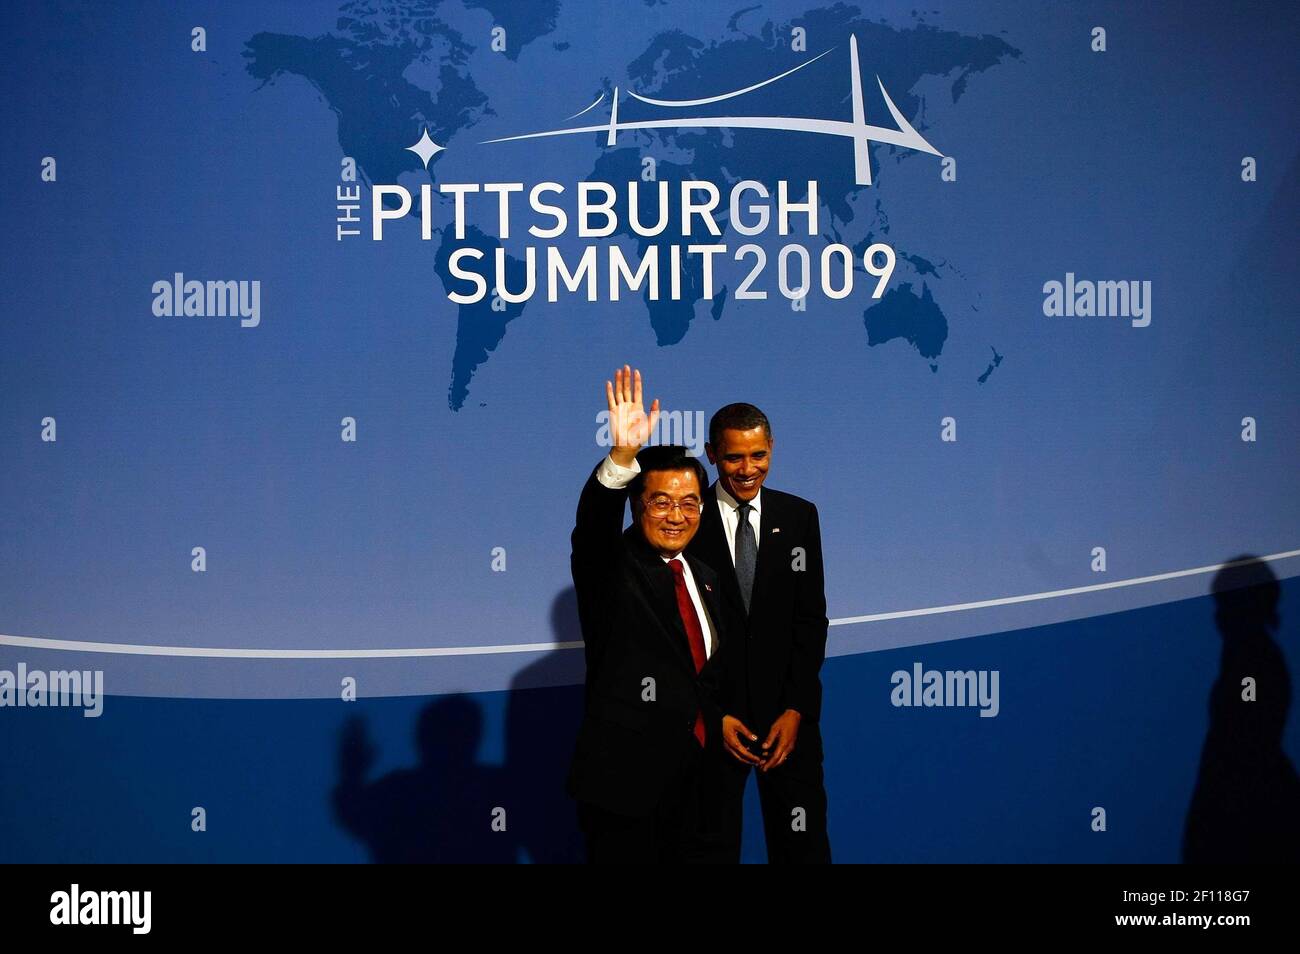 24 September 2009 - Pittsburgh, Pennsylvania - U.S. President Barack Obama (R) welcomes Chinese President Hu Jintao to the welcoming dinner for G-20 leaders at the Phipps Conservatory on September 24, 2009 in Pittsburgh, Pennsylvania. Heads of state from the world's leading economic powers arrived today for the two-day G-20 summit held at the David L. Lawrence Convention Center aimed at promoting economic growth. Photo Credit: Win McNamee/Pool/Sipa Press/0909251418 Stock Photo